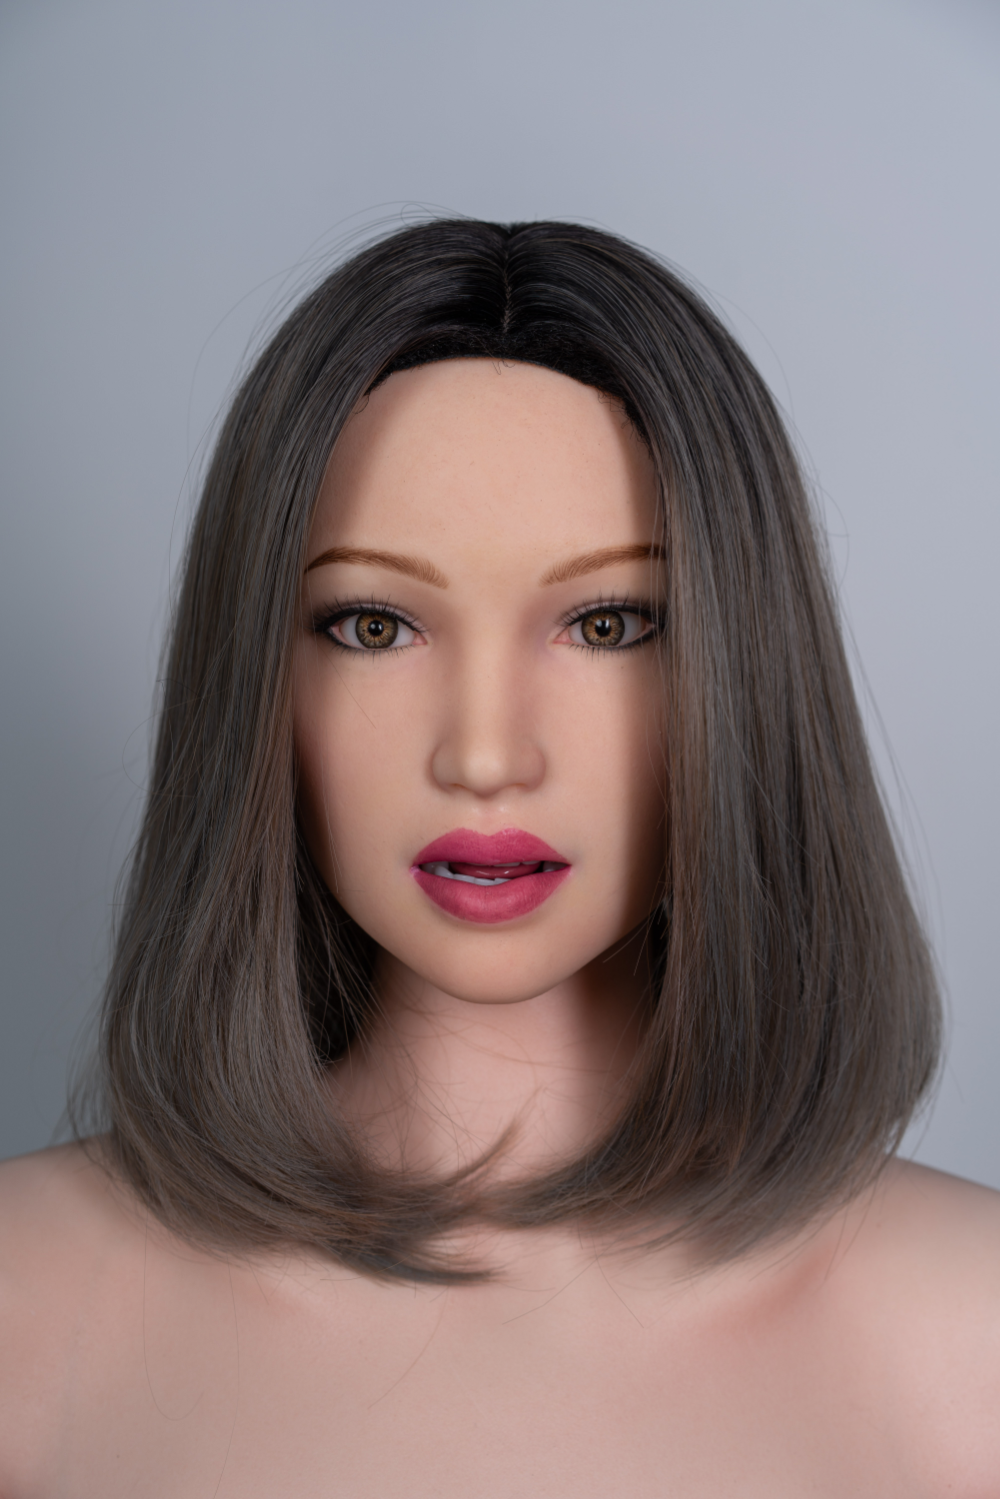 Zelex Doll Inspiration 175 cm E Silicone - Jennifer (Movable Jaws) | Buy Sex Dolls at DOLLS ACTUALLY